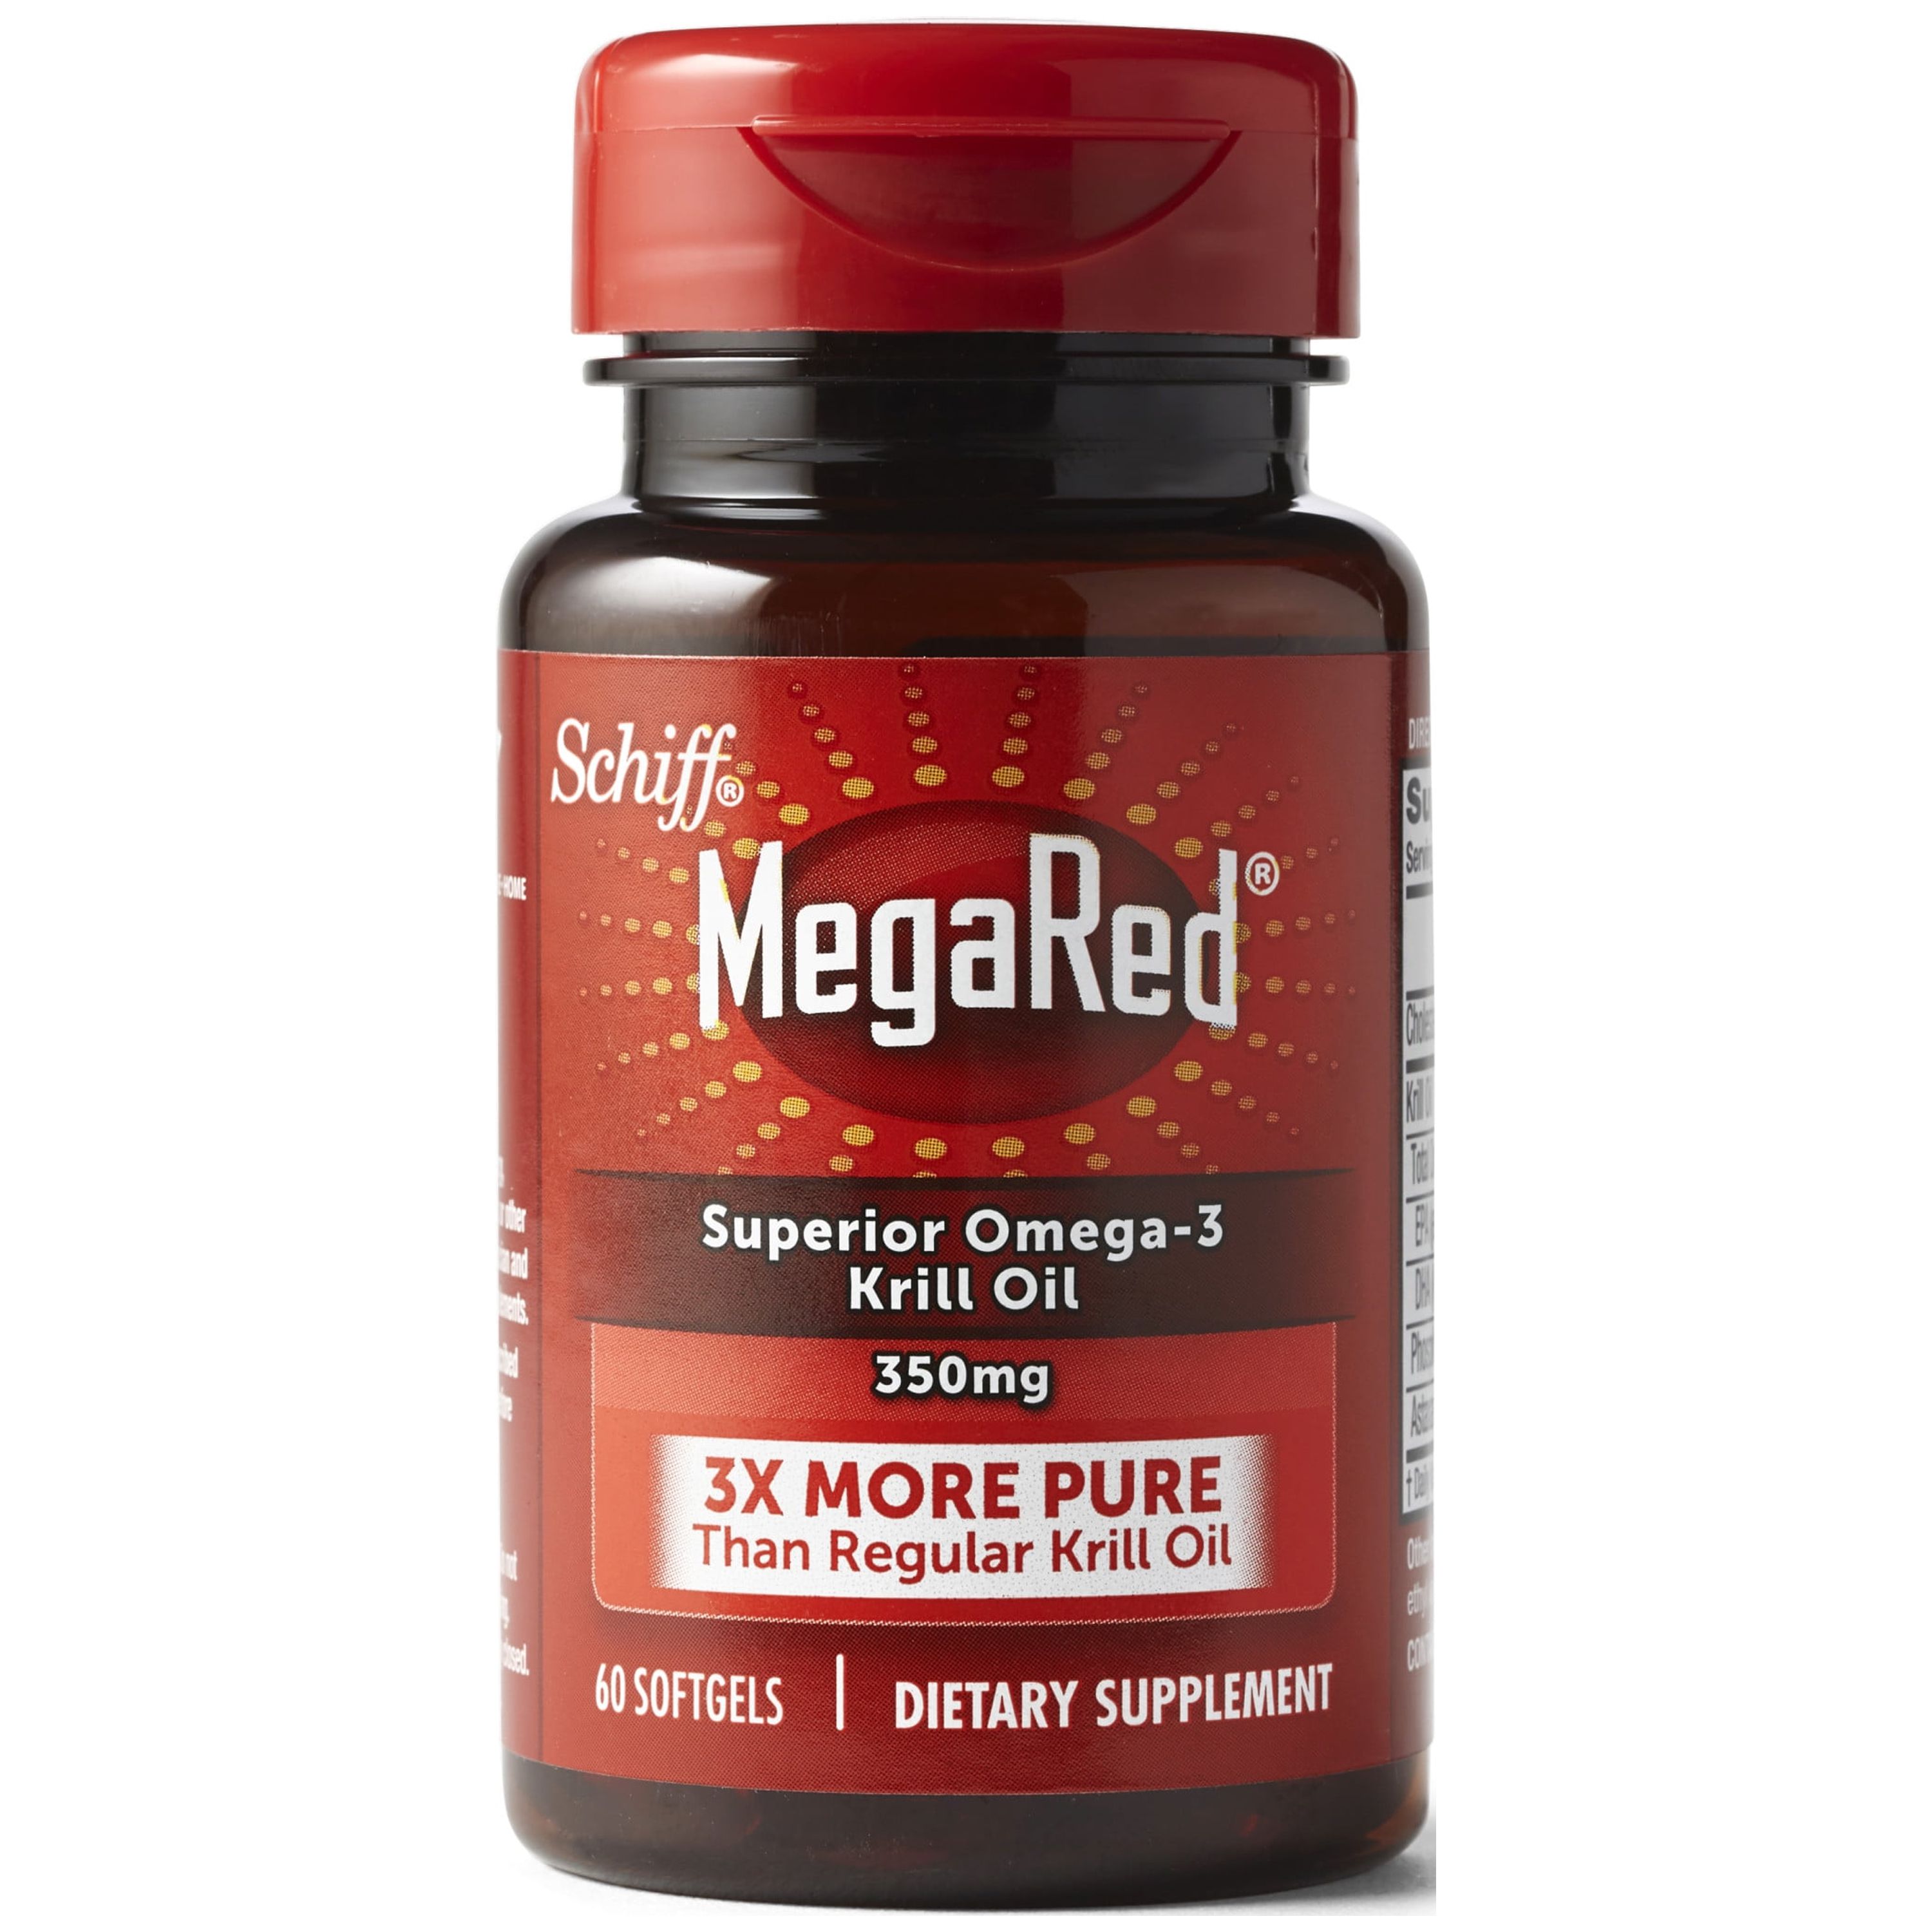 MegaRed 350mg Superior Omega-3s Krill Oil, 60 Softgels - image 12 of 14